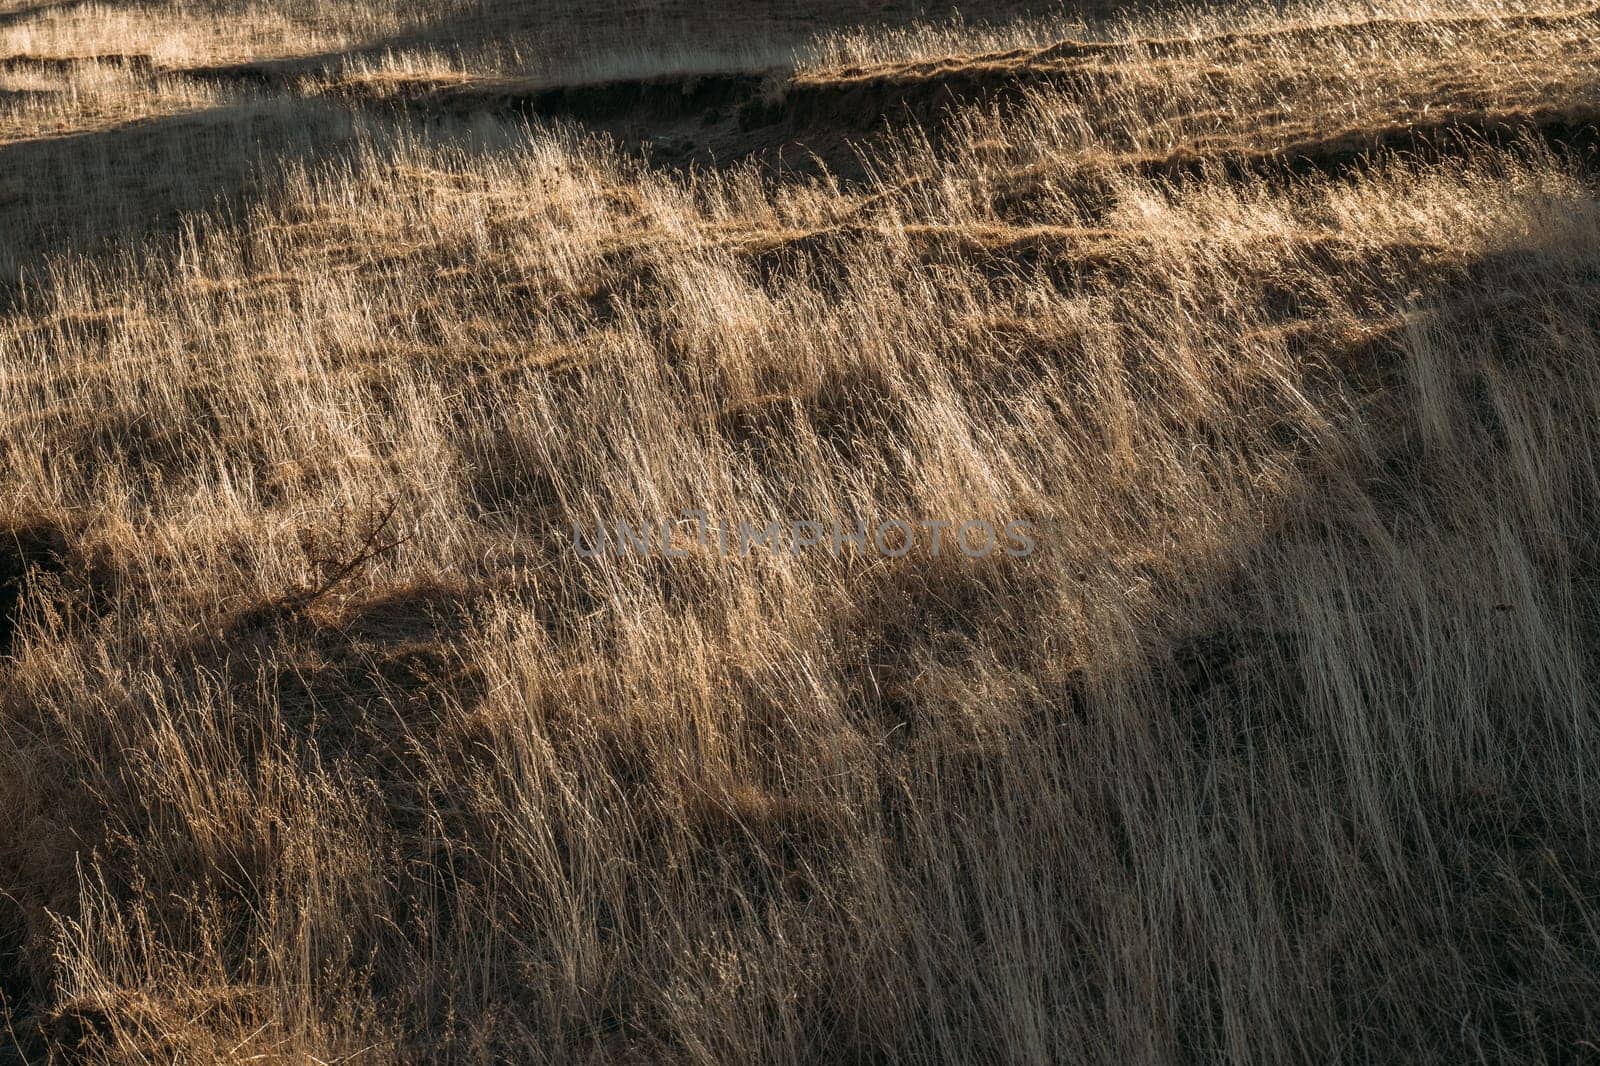 The warm glow of sunlight enhances the textures of the grass.